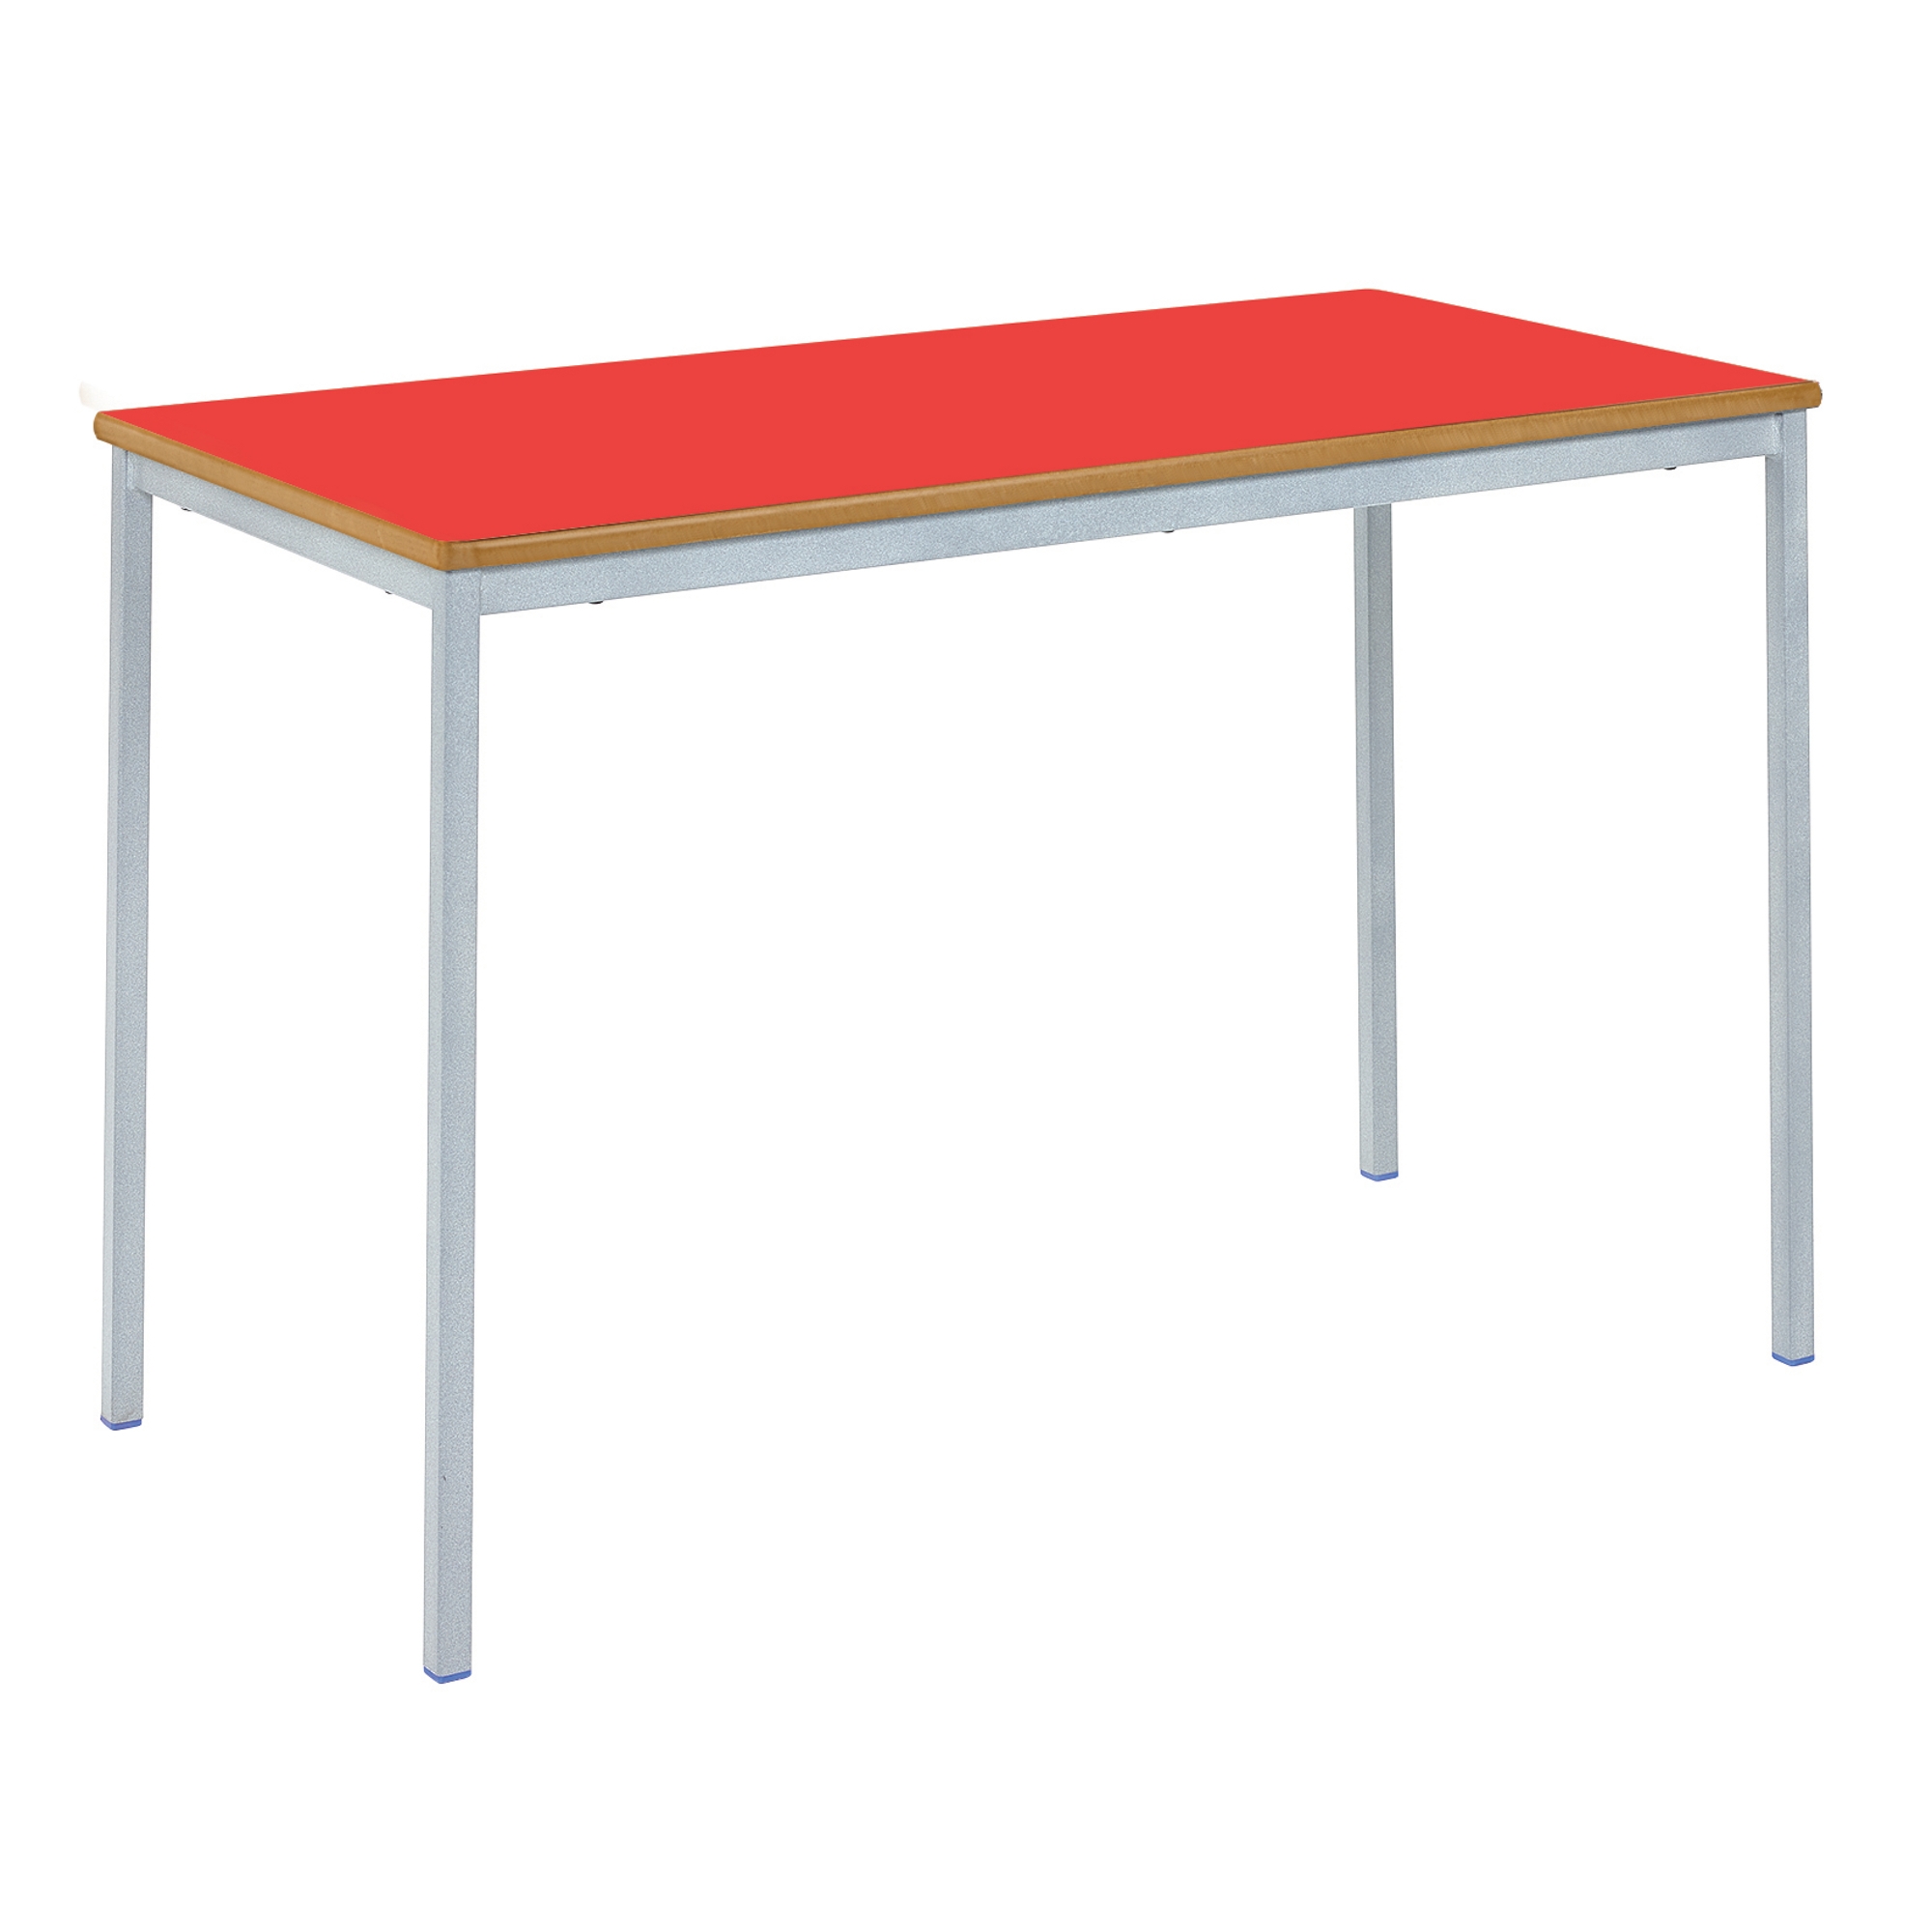 Classmates Rectangular Fully Welded Classroom Table - 1200 x 600 x 710mm - Red